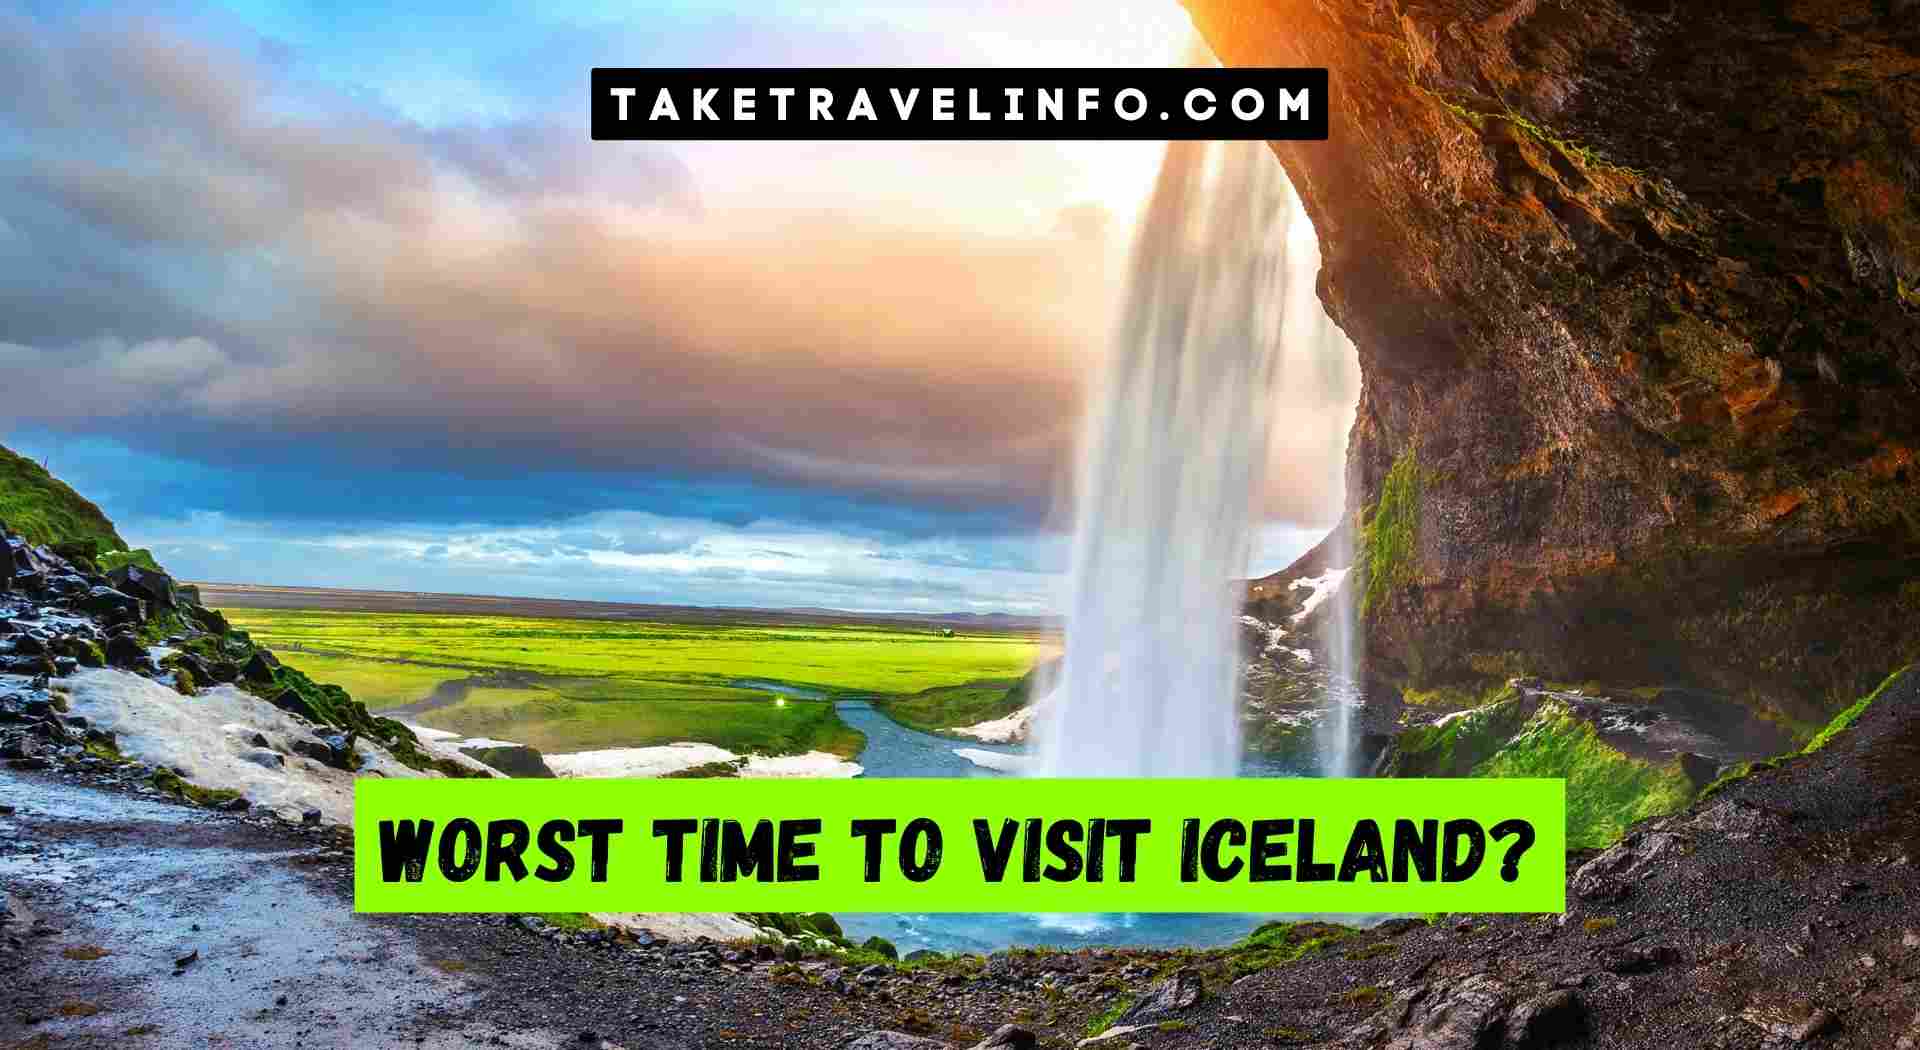 Worst Time to Visit Iceland?